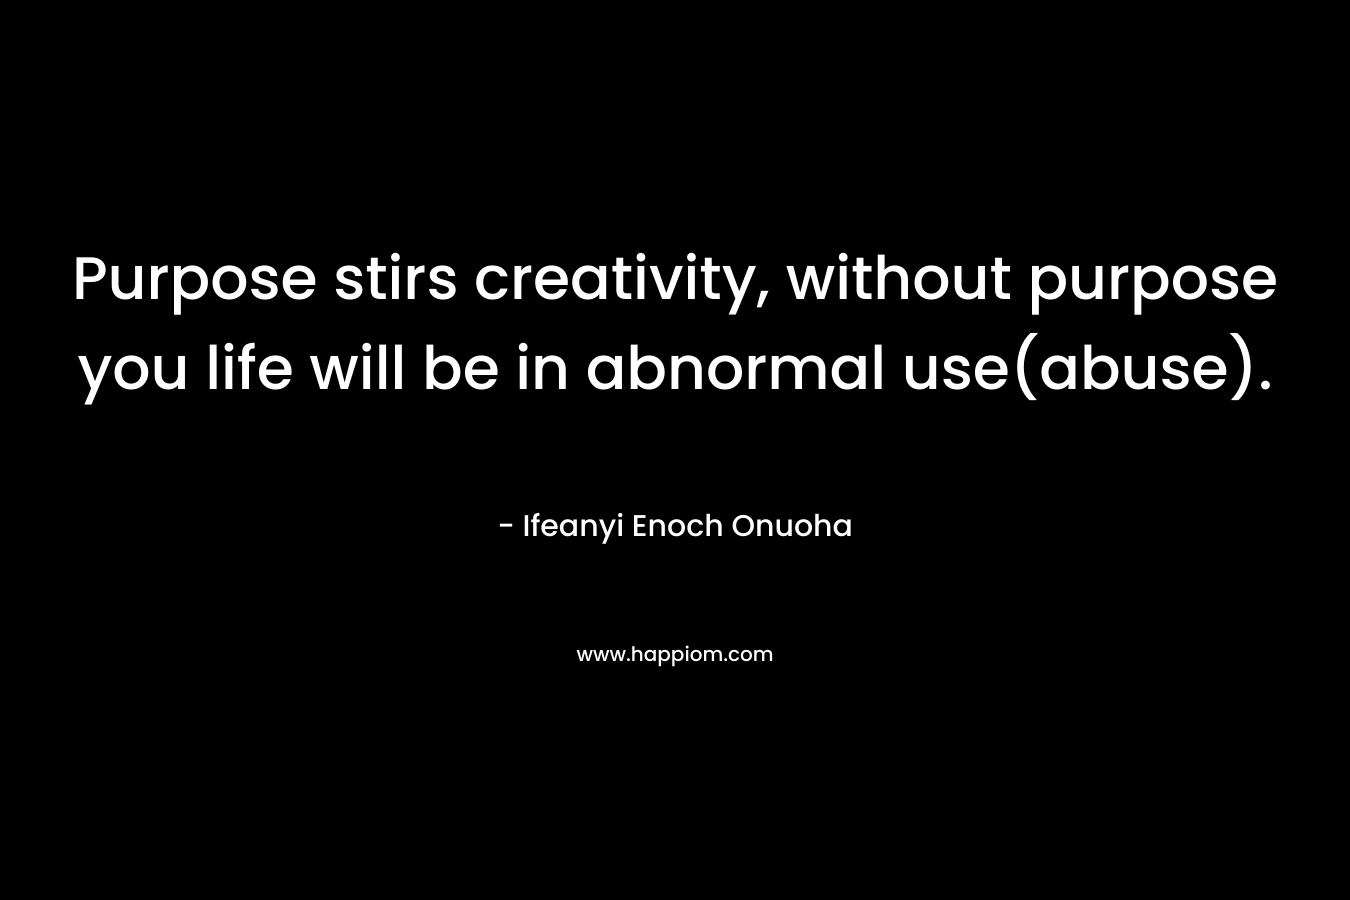 Purpose stirs creativity, without purpose you life will be in abnormal use(abuse).